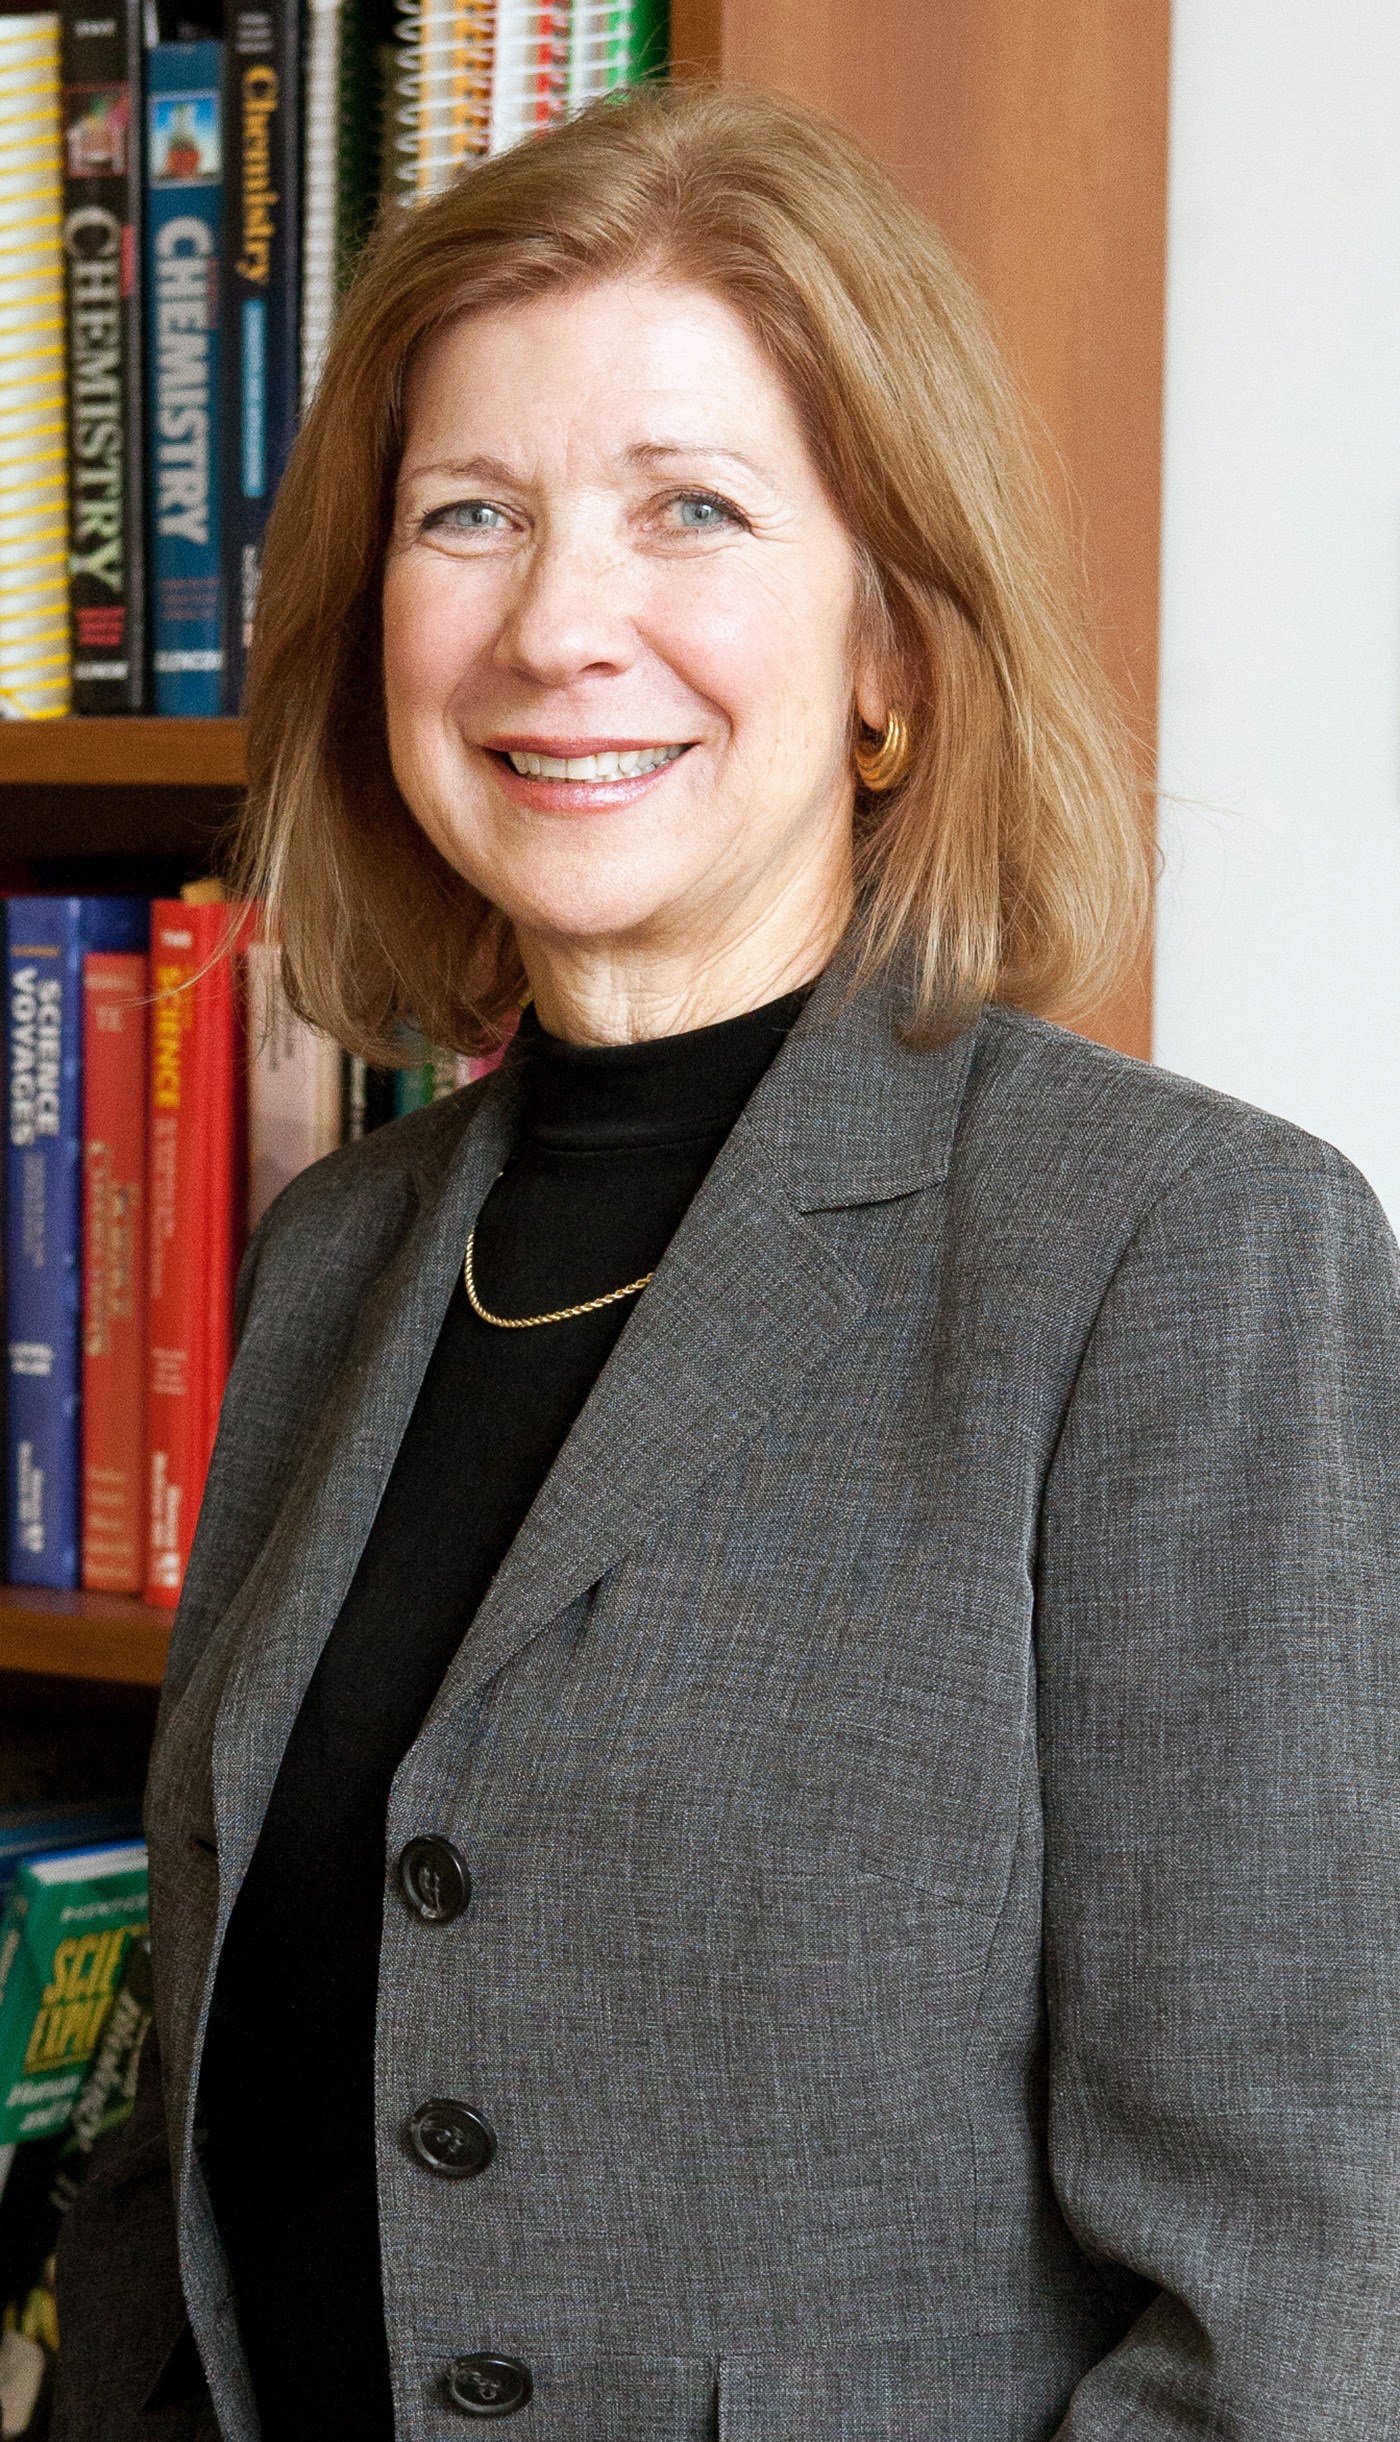 Michaela Colombo is the Faculty Chair, Professor, Leadership in Schooling in the School of Education at UMass Lowell